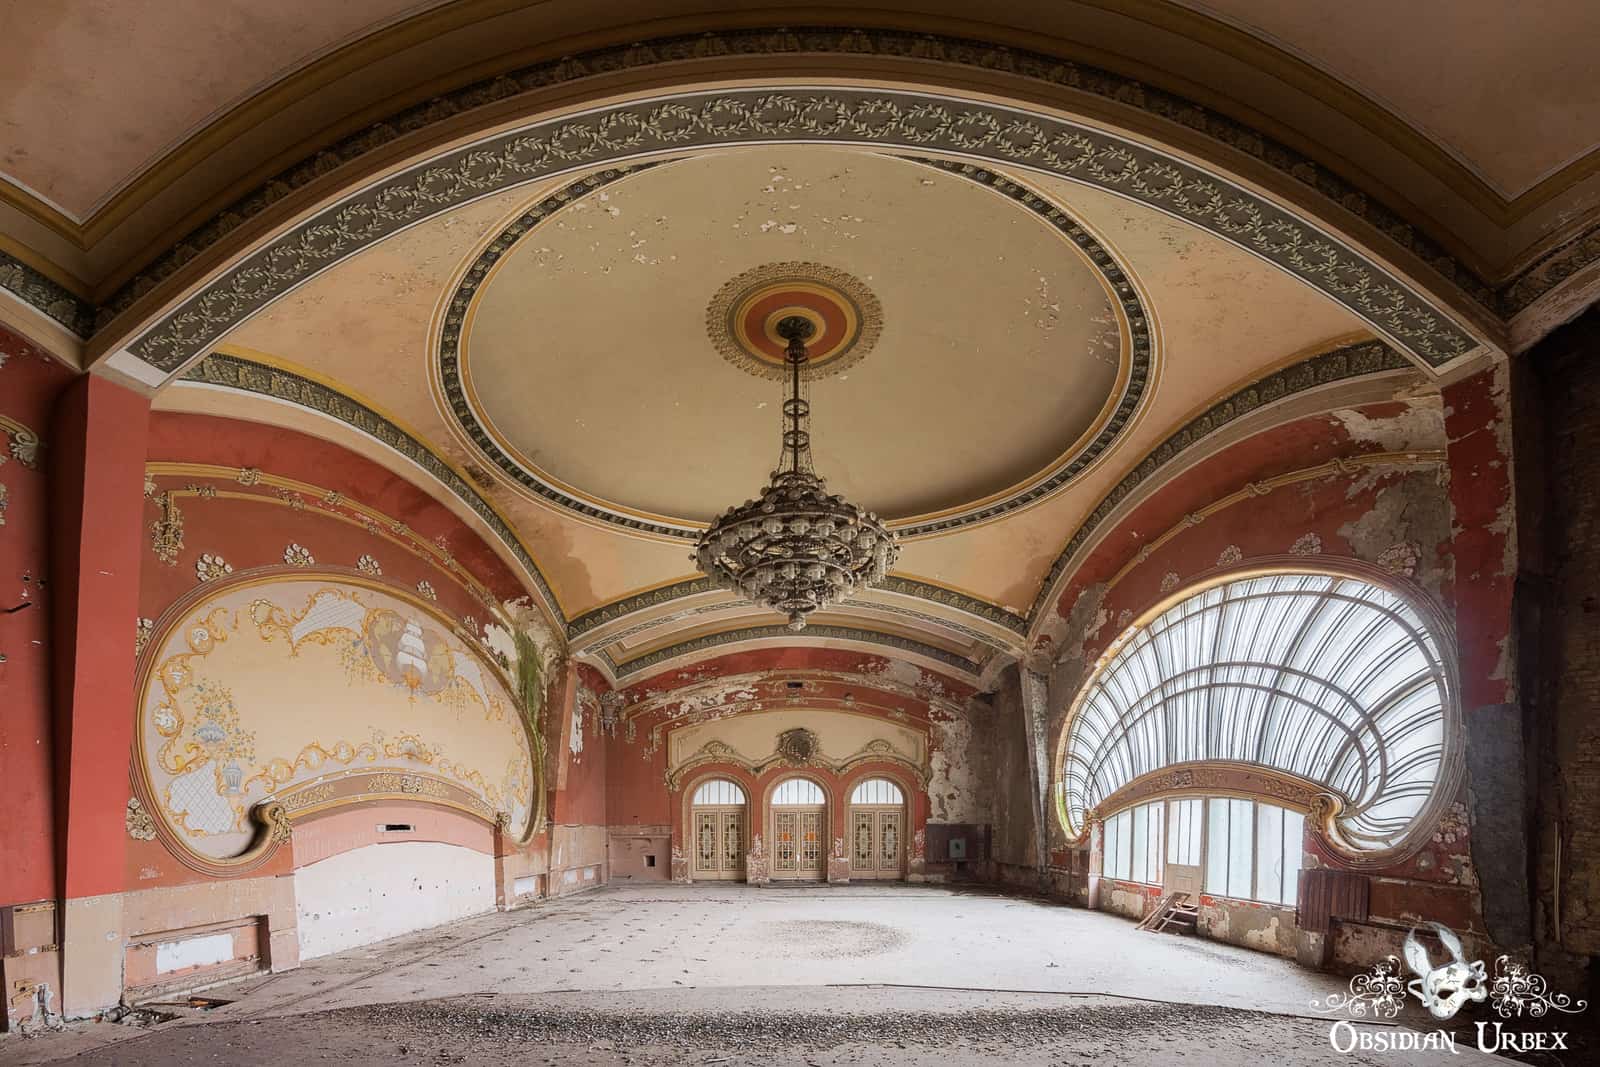 08_casino-royale-romania-abandoned-grandeur-fisheye-view-from-stage